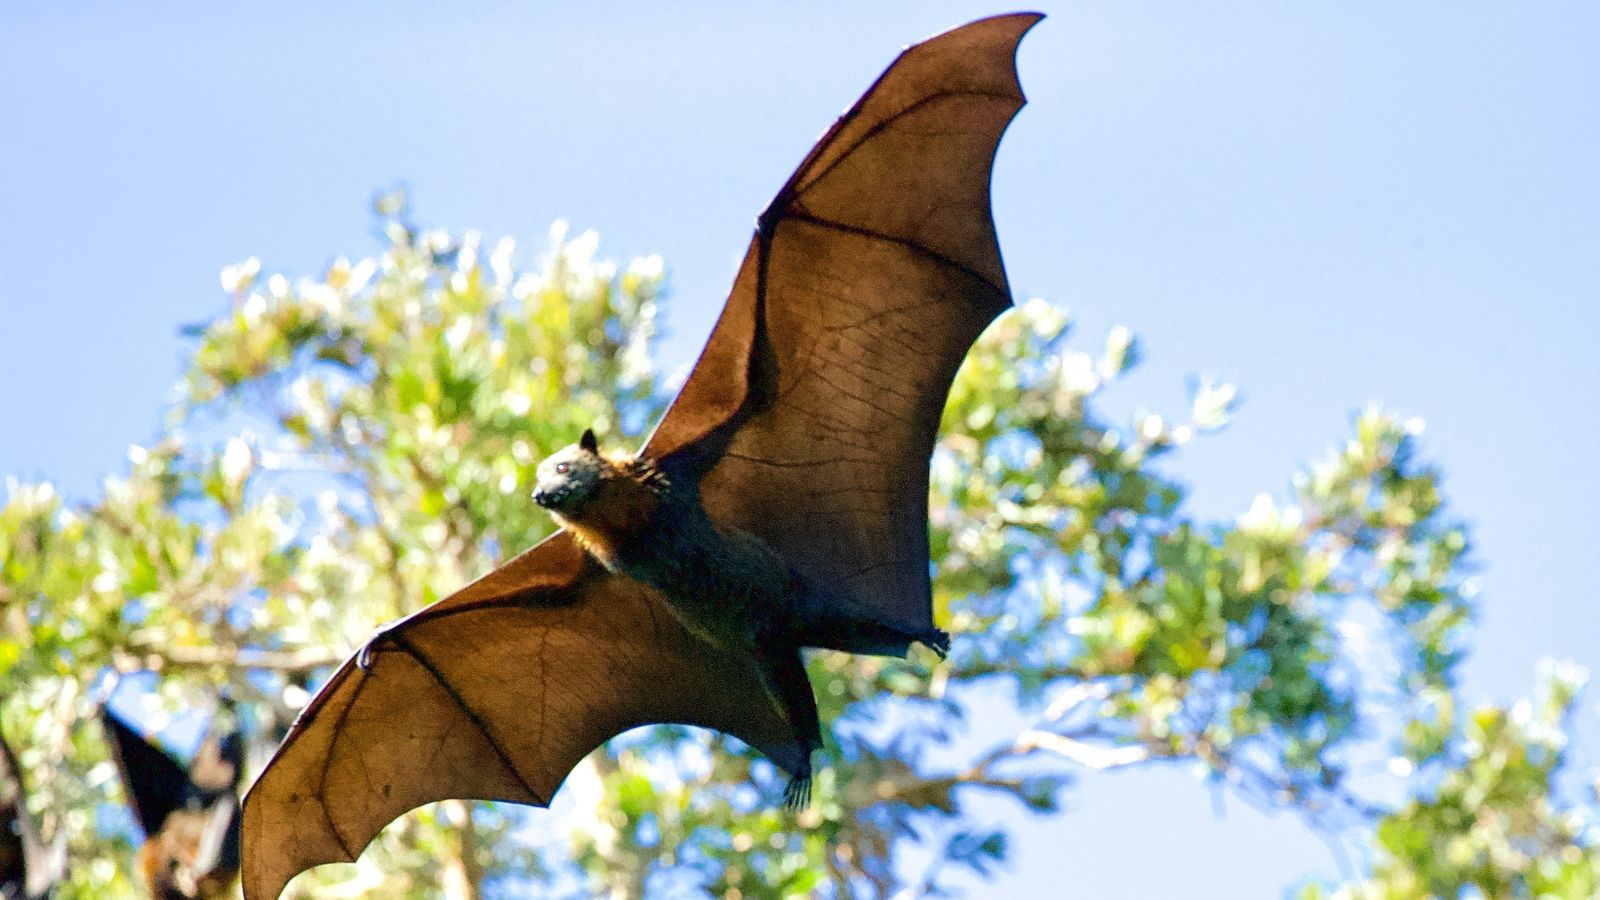 How to get rid of bats in a house naturally: 8 humane ways